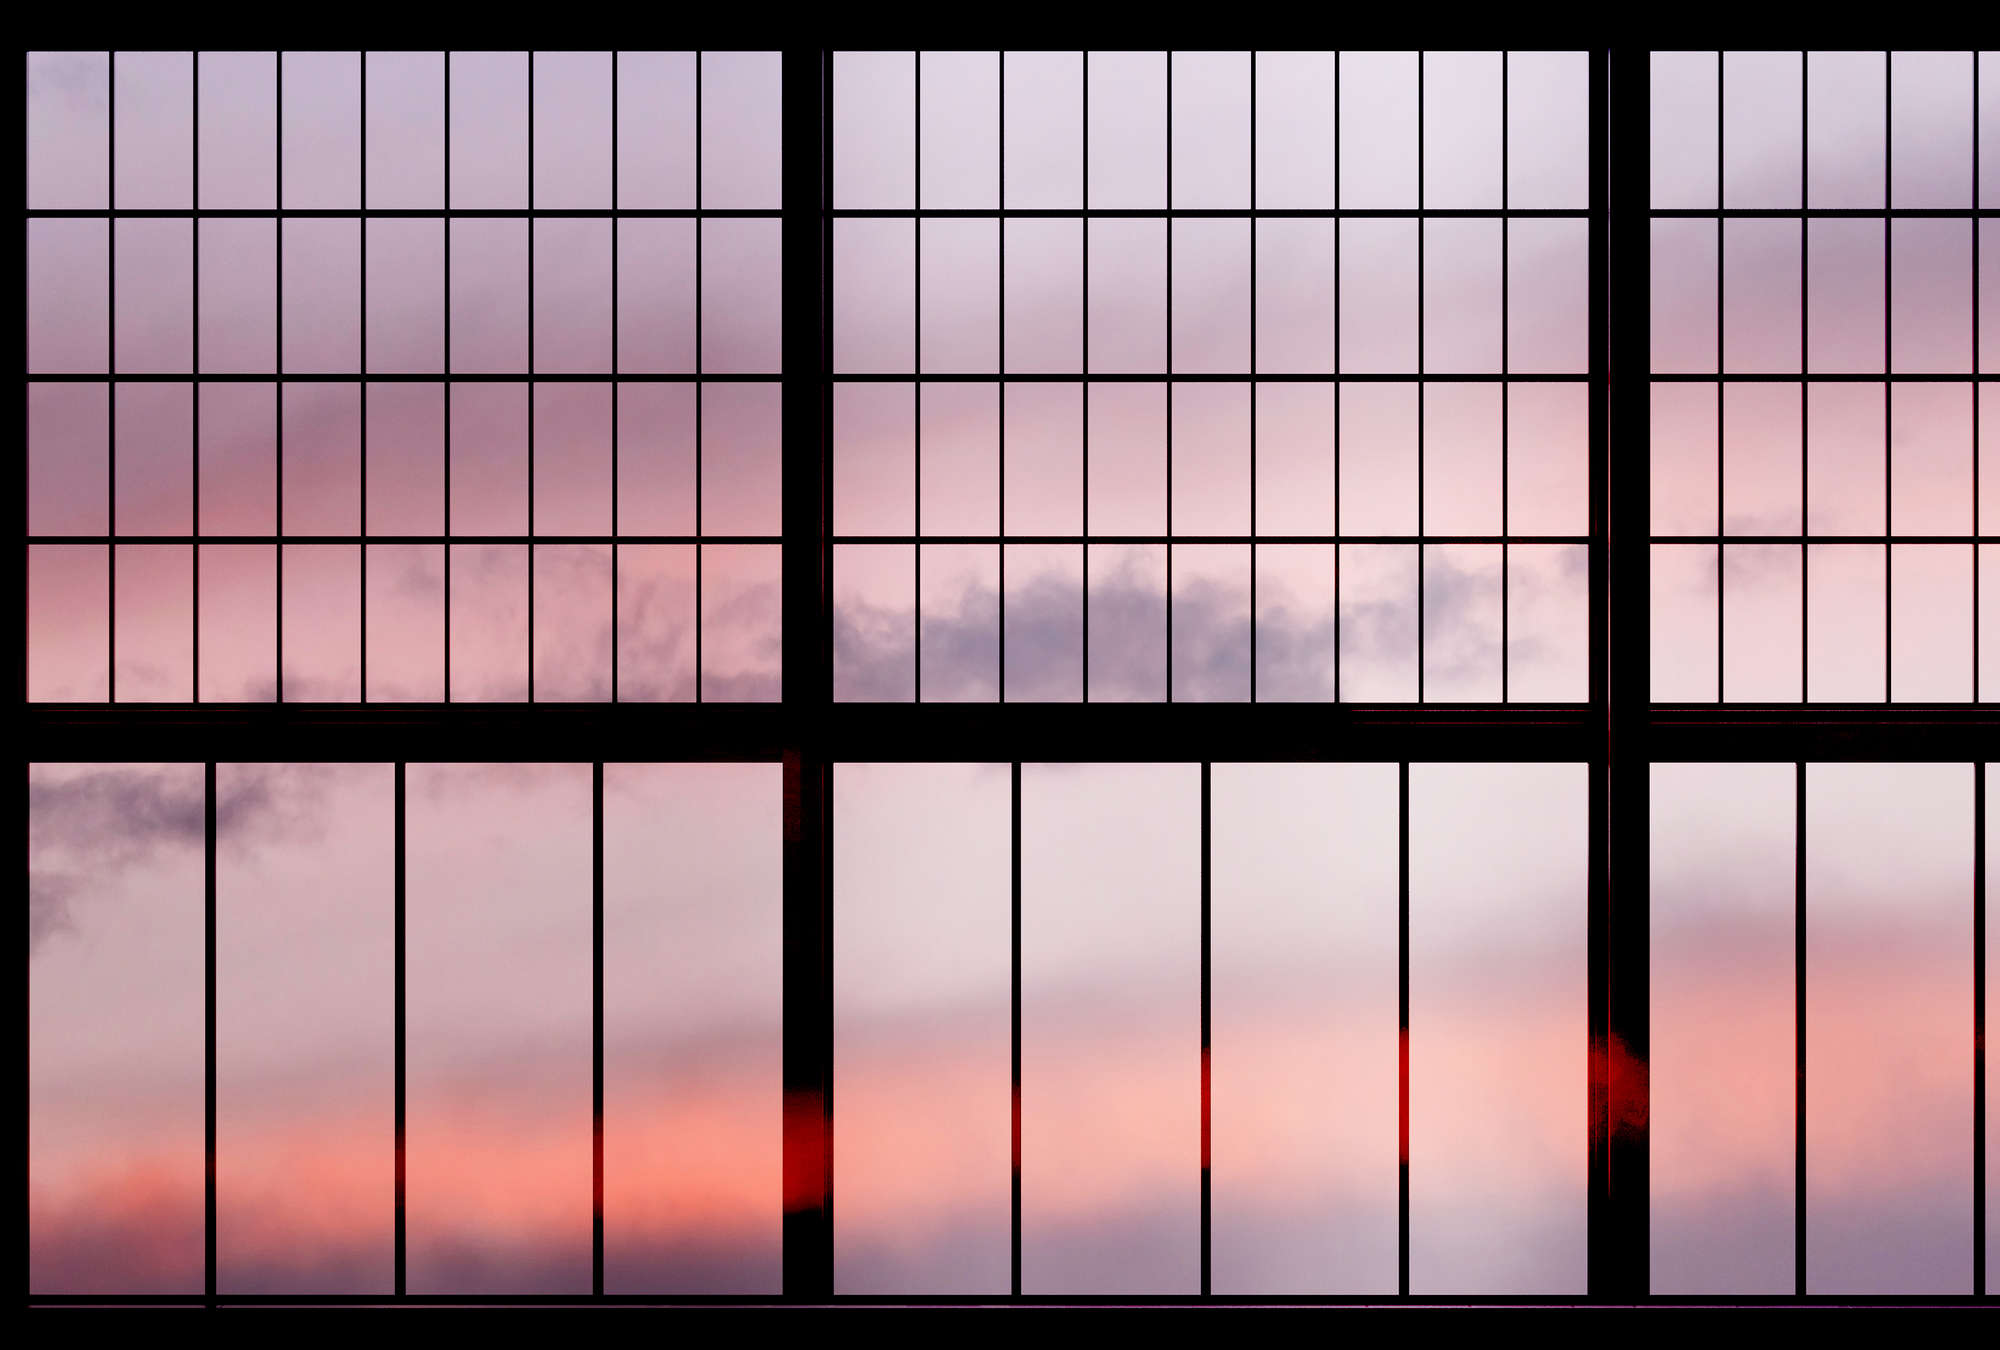             Sky 1 - Wallpaper Window View Sunrise - Pink, Black | Pearl Smooth Non-woven
        